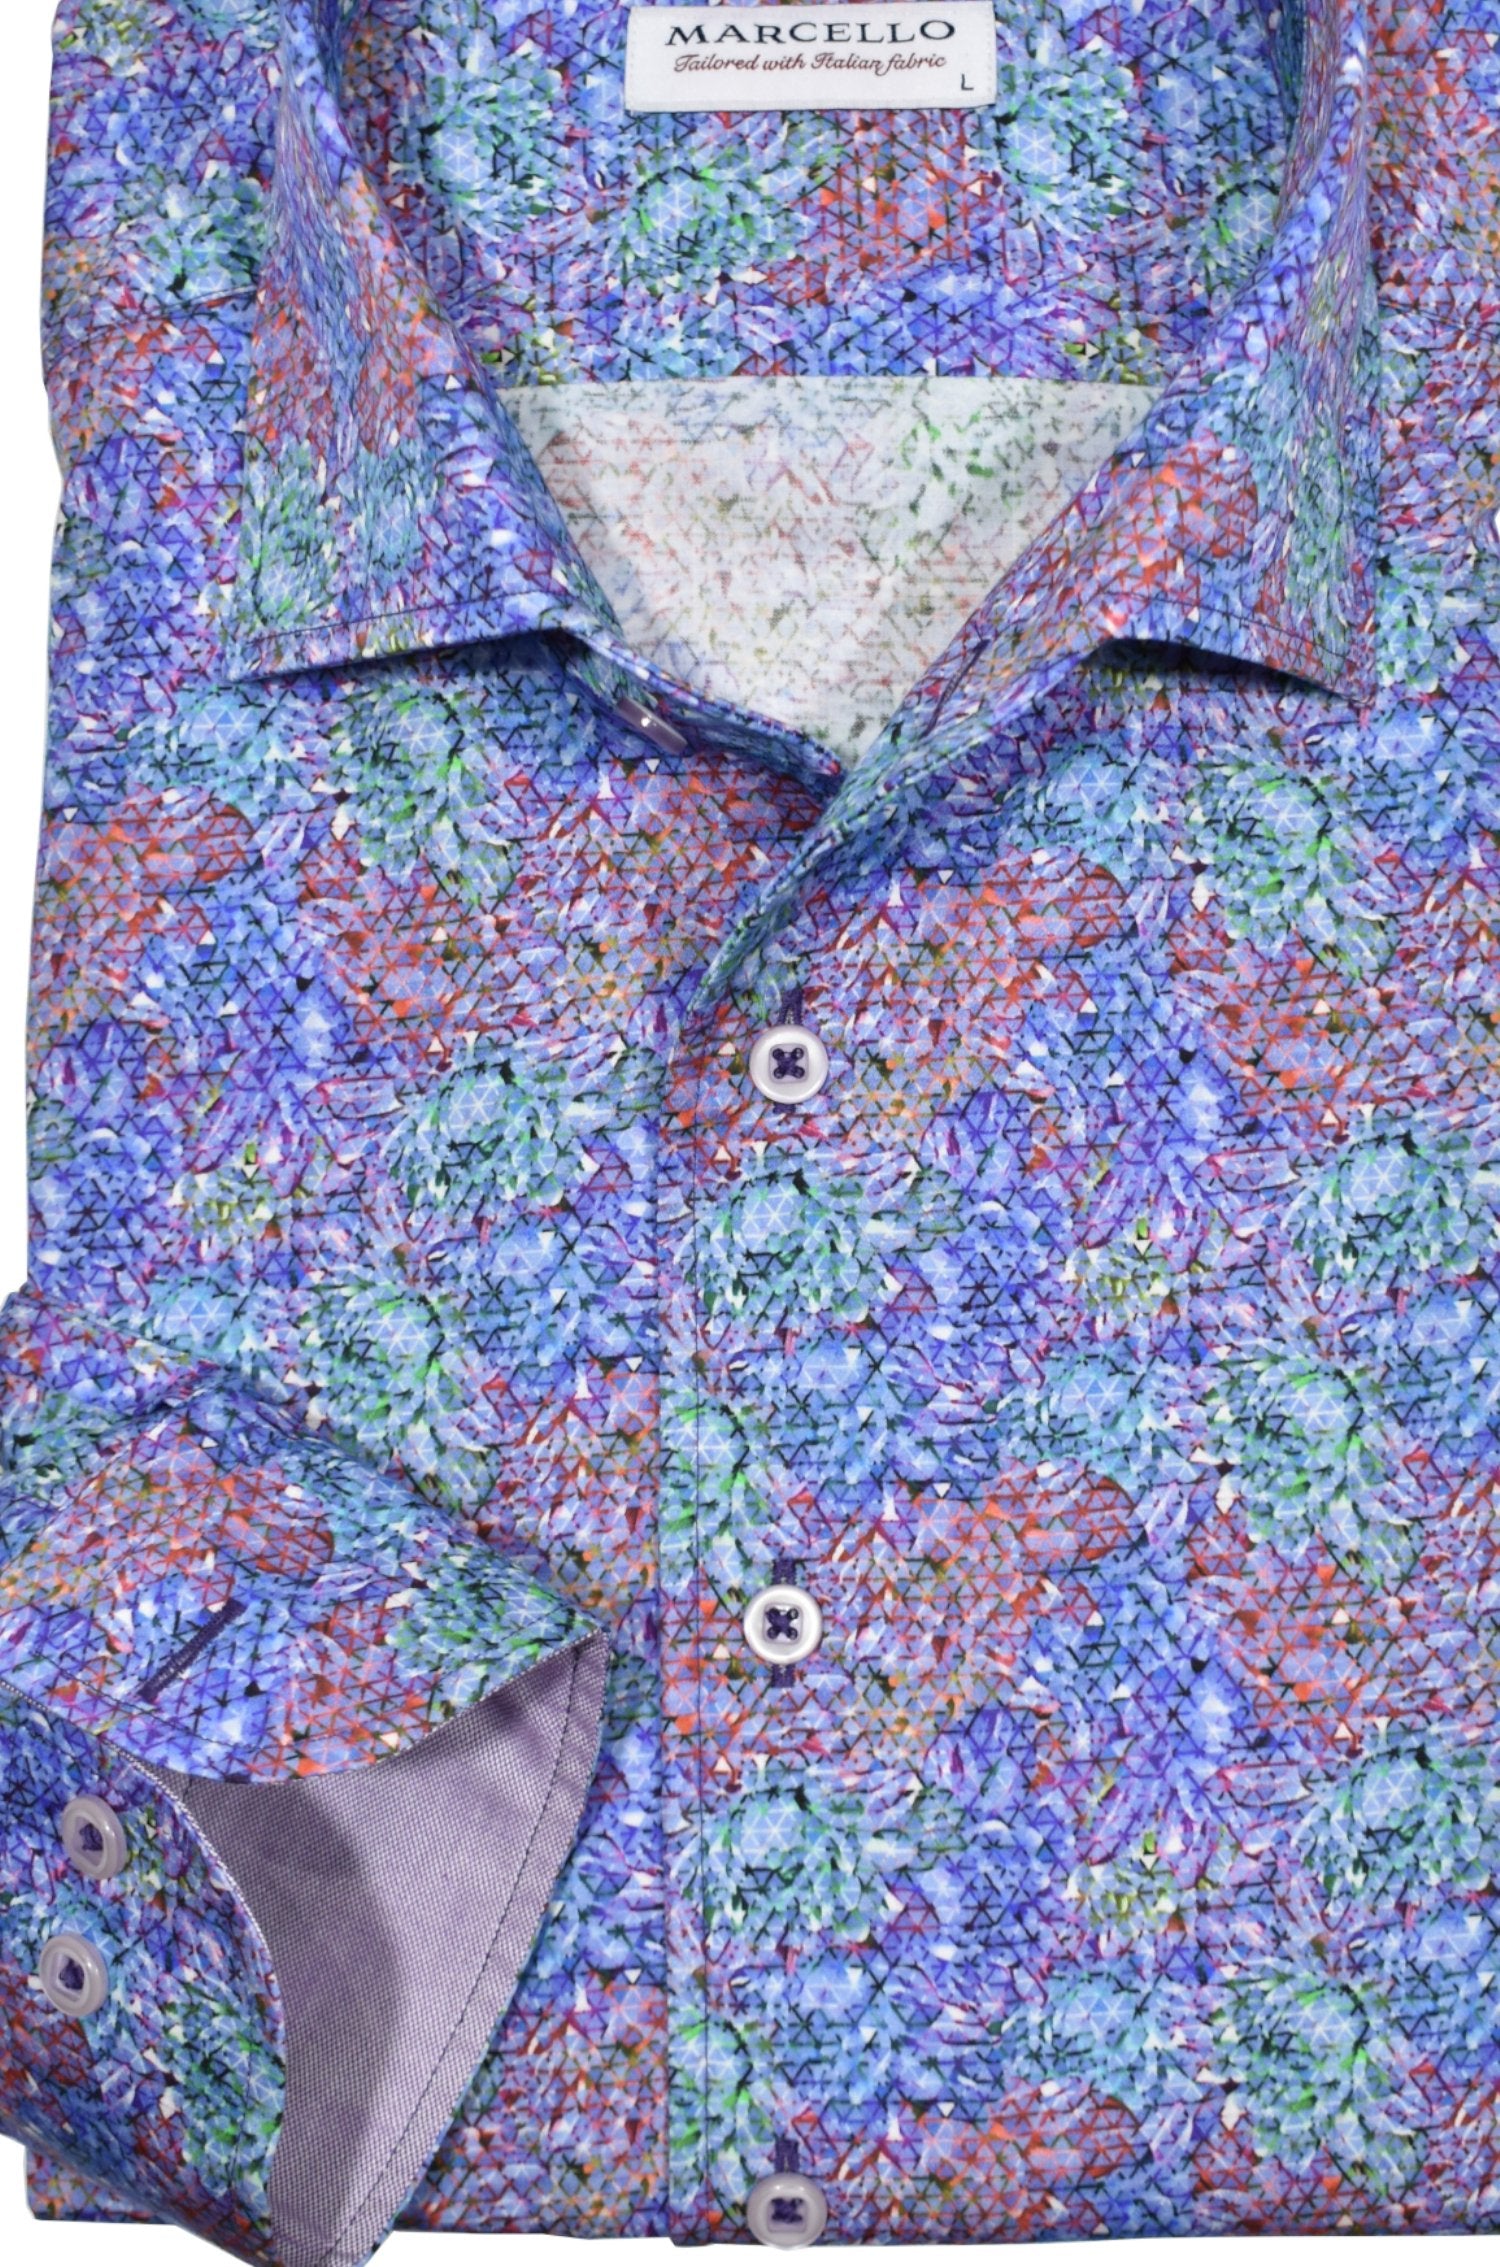 Elevate your style with the Marcello Multi Scope Roll Collar Shirt. Featuring a Marcello exclusive one piece roll collar, this multi geometric plum and blue patterned abstract shirt is accented with custom details. Exude style and sophistication with this must-have piece.